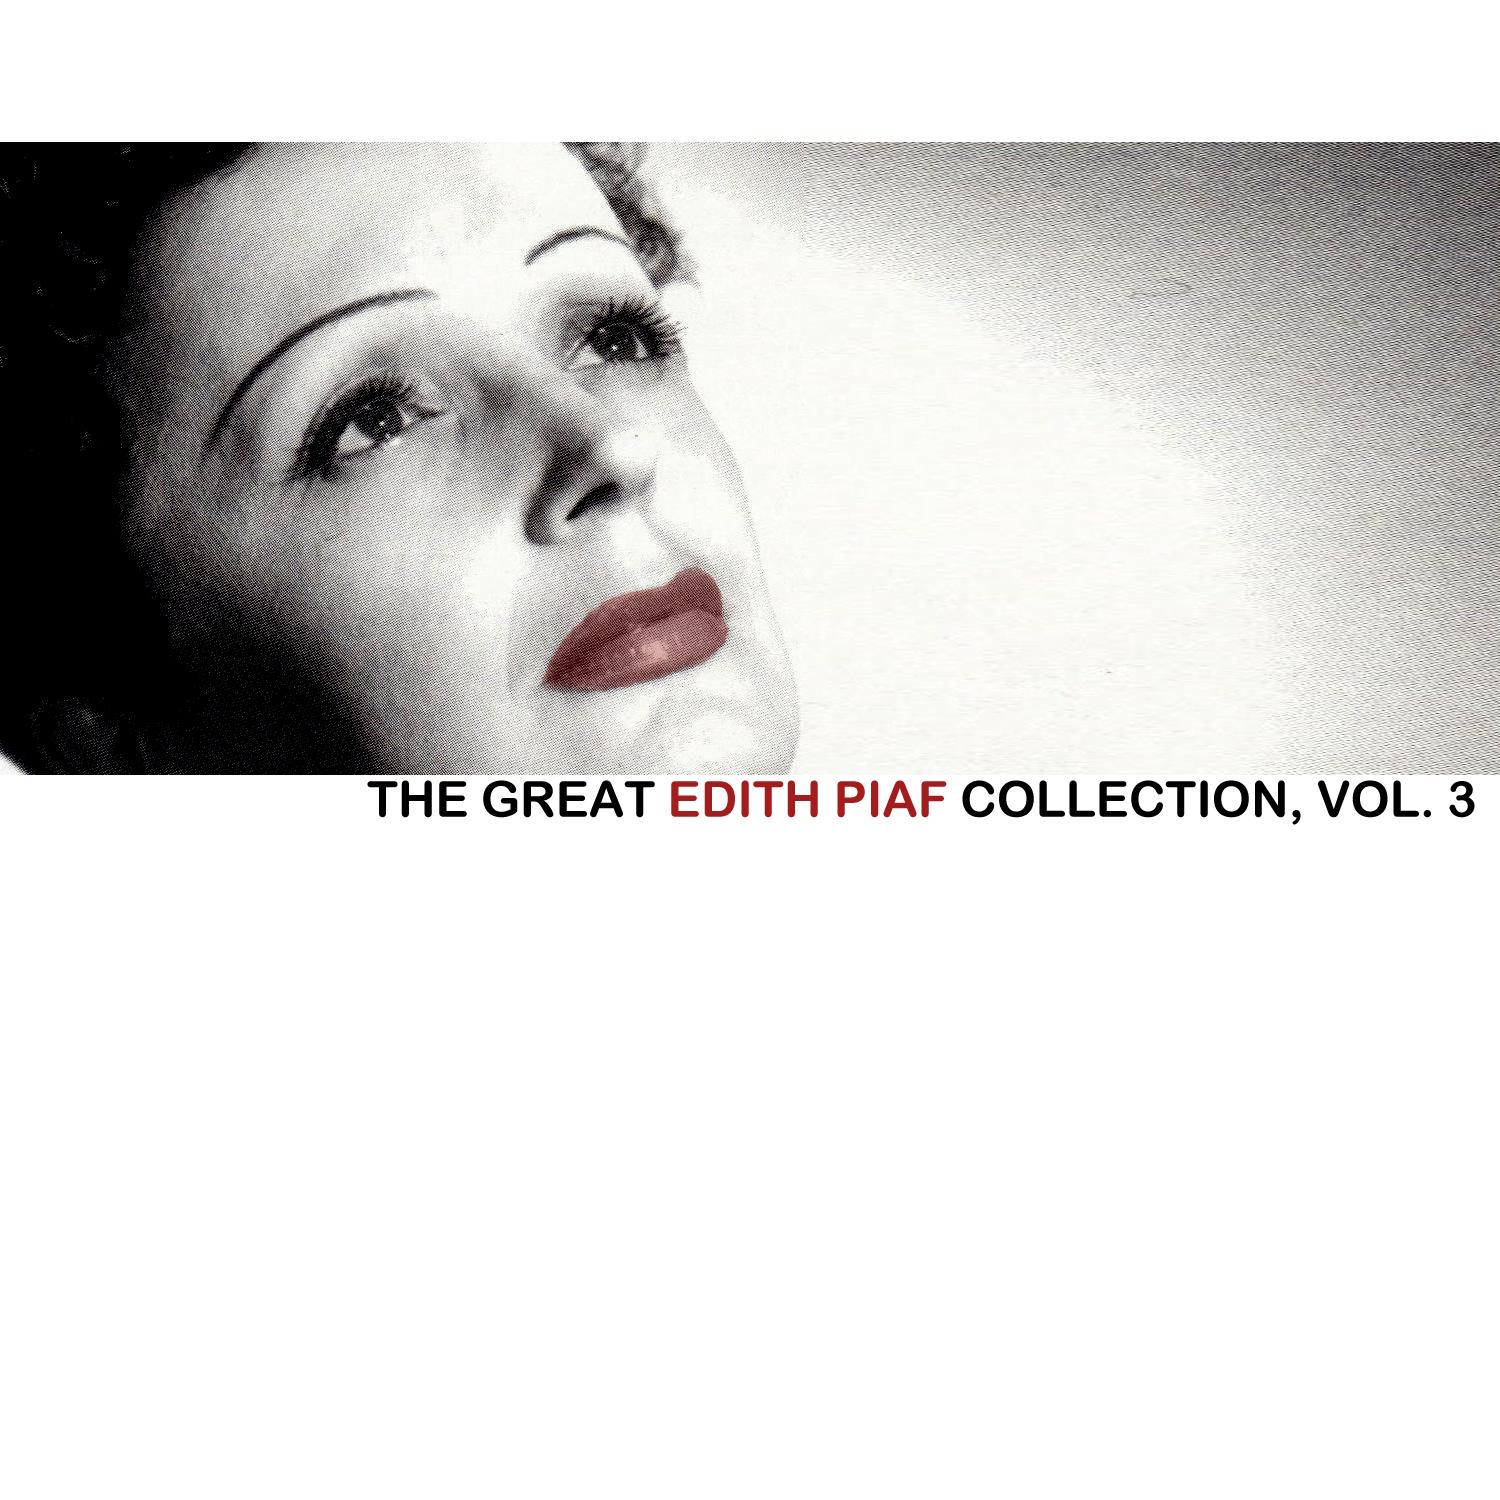 The Great Edith Piaf Collection, Vol. 3